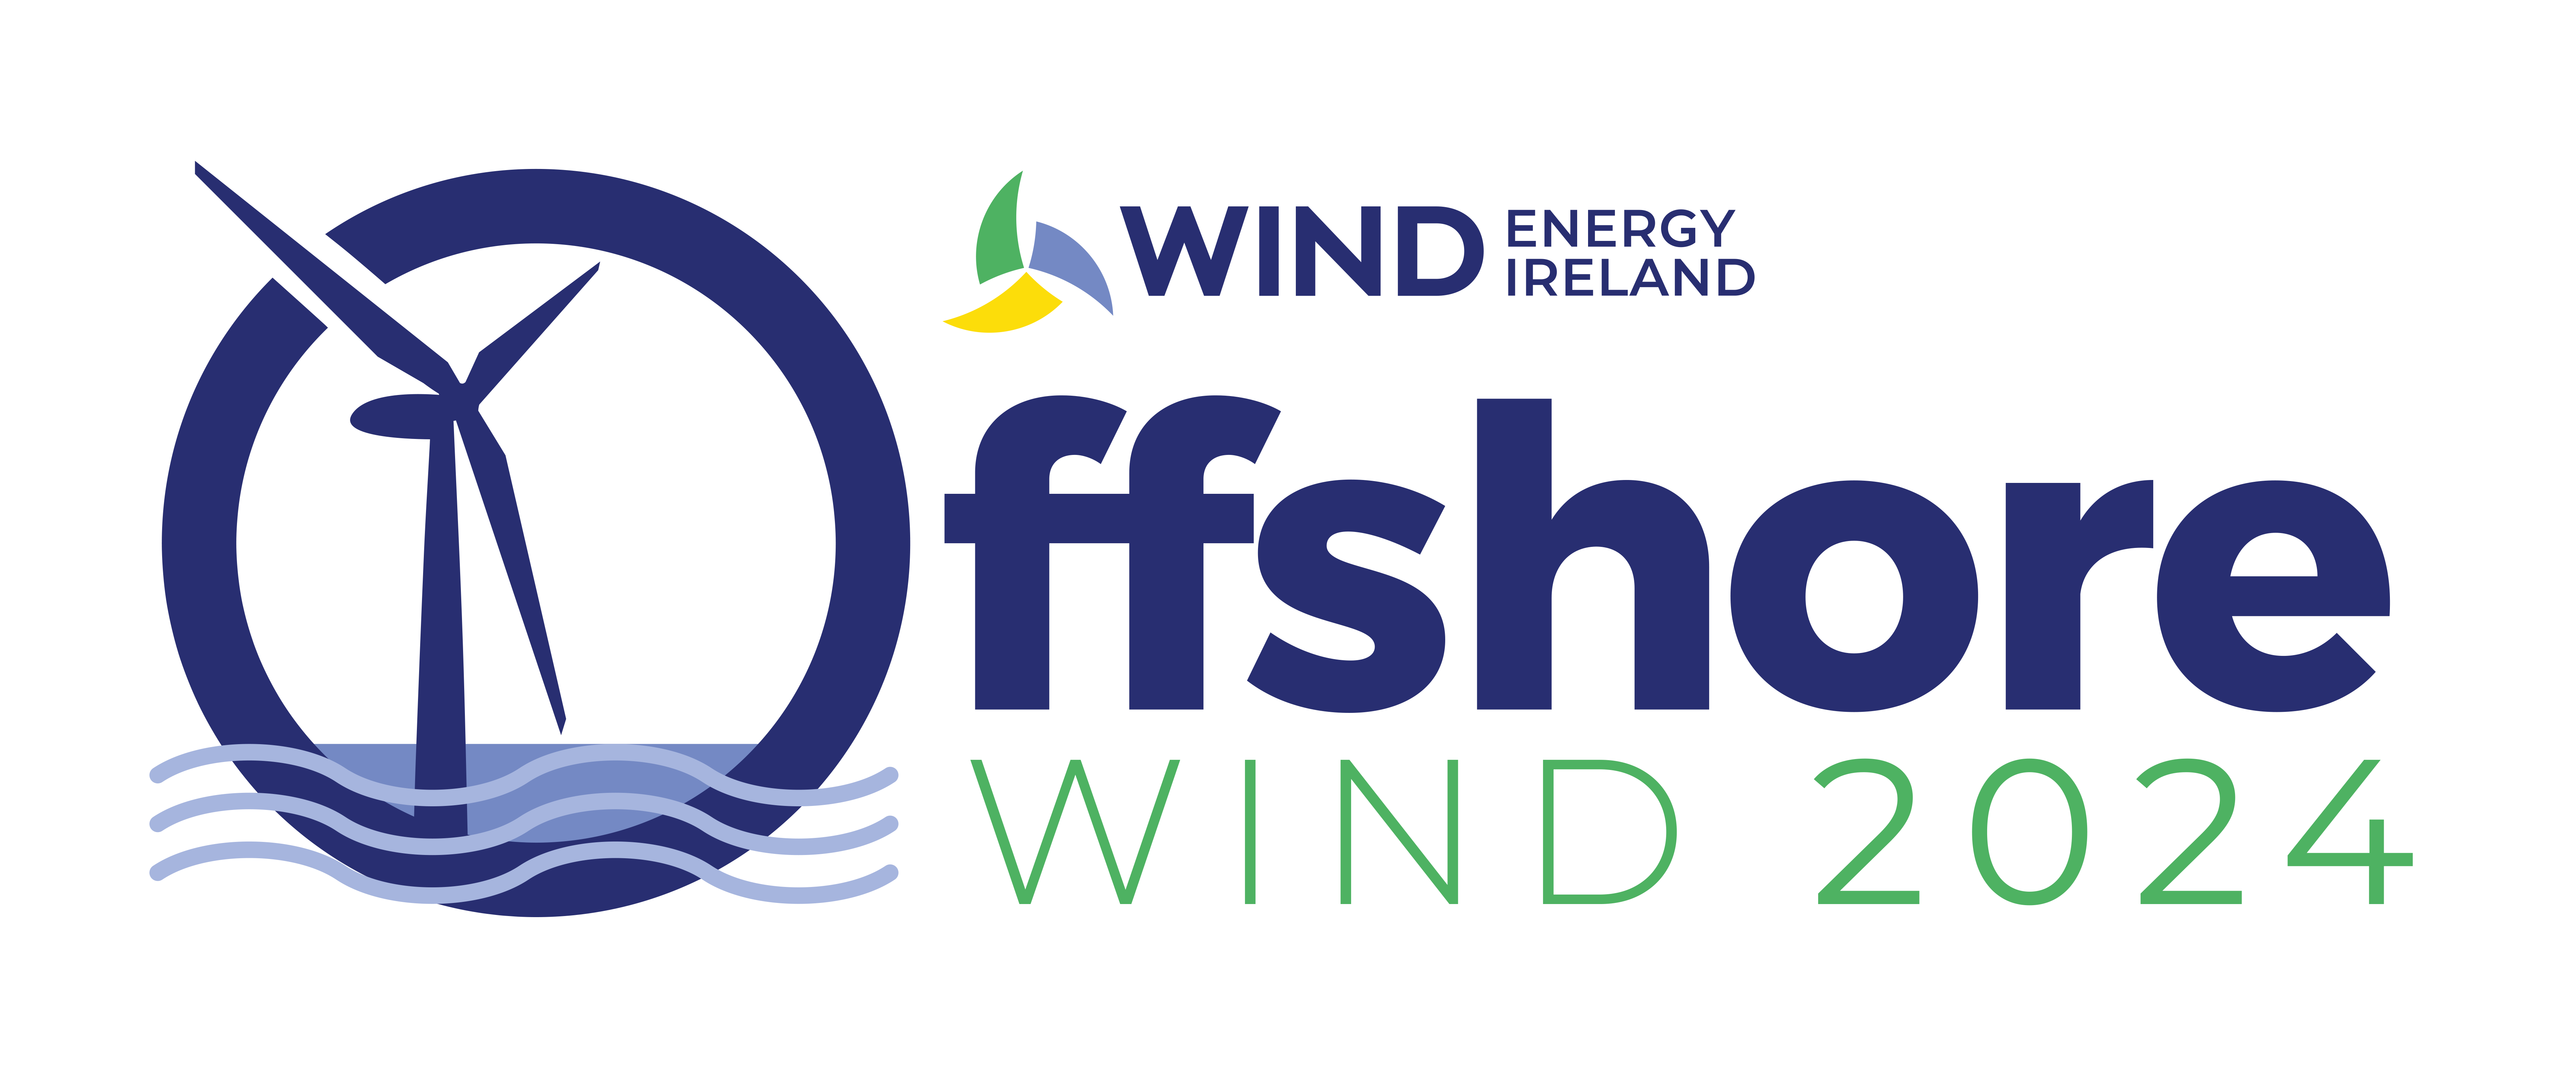 WEI 2024 Offshore Wind Events